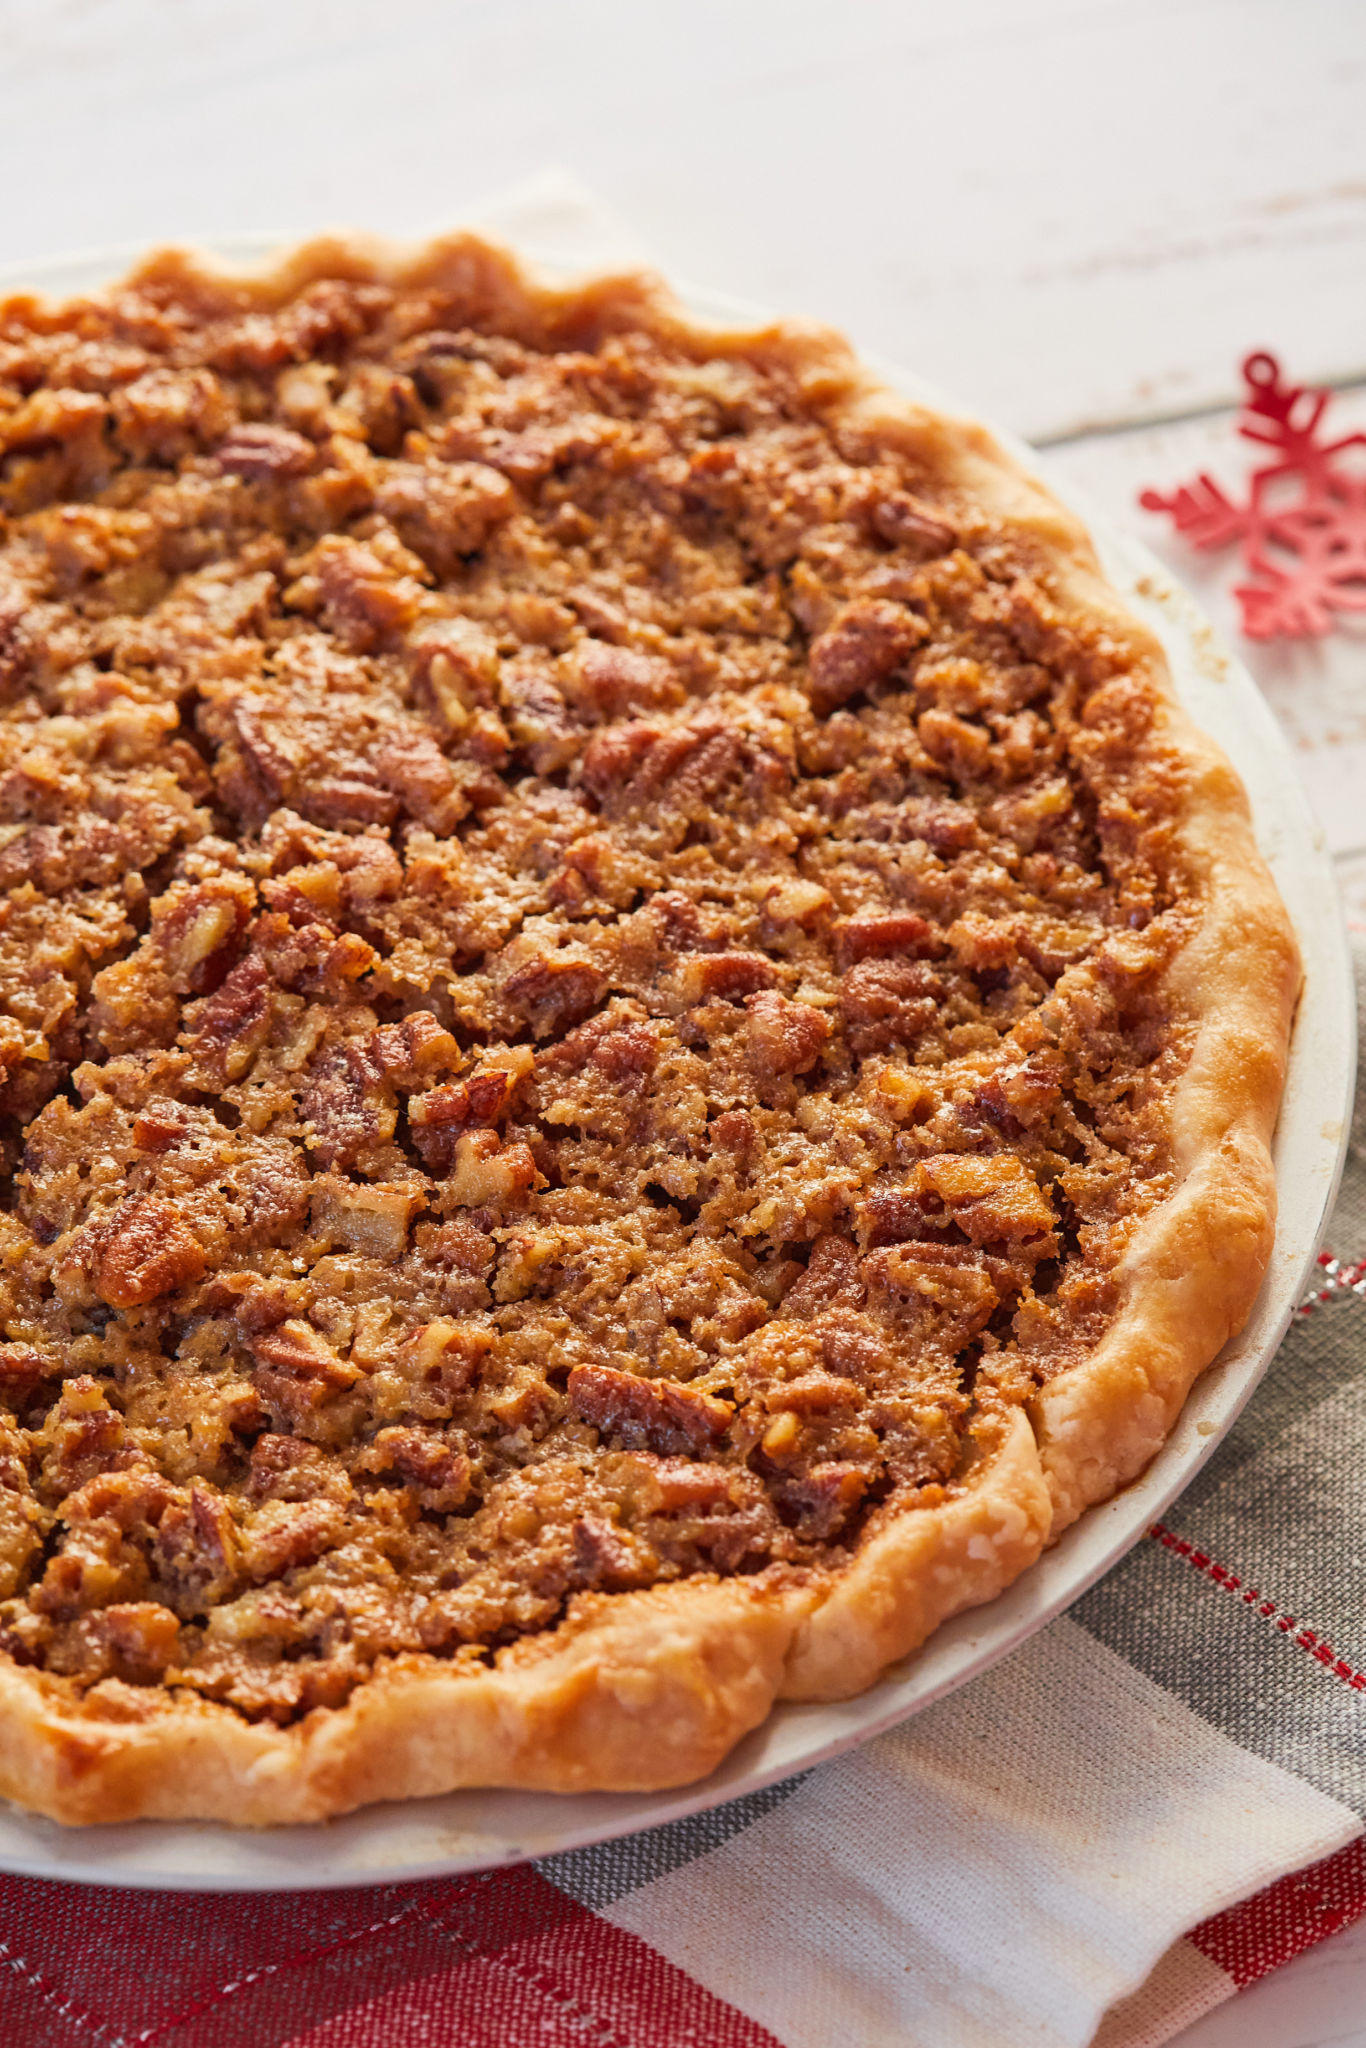 A whole American Buttermilk Pecan Pie, to show the texture and pecans.